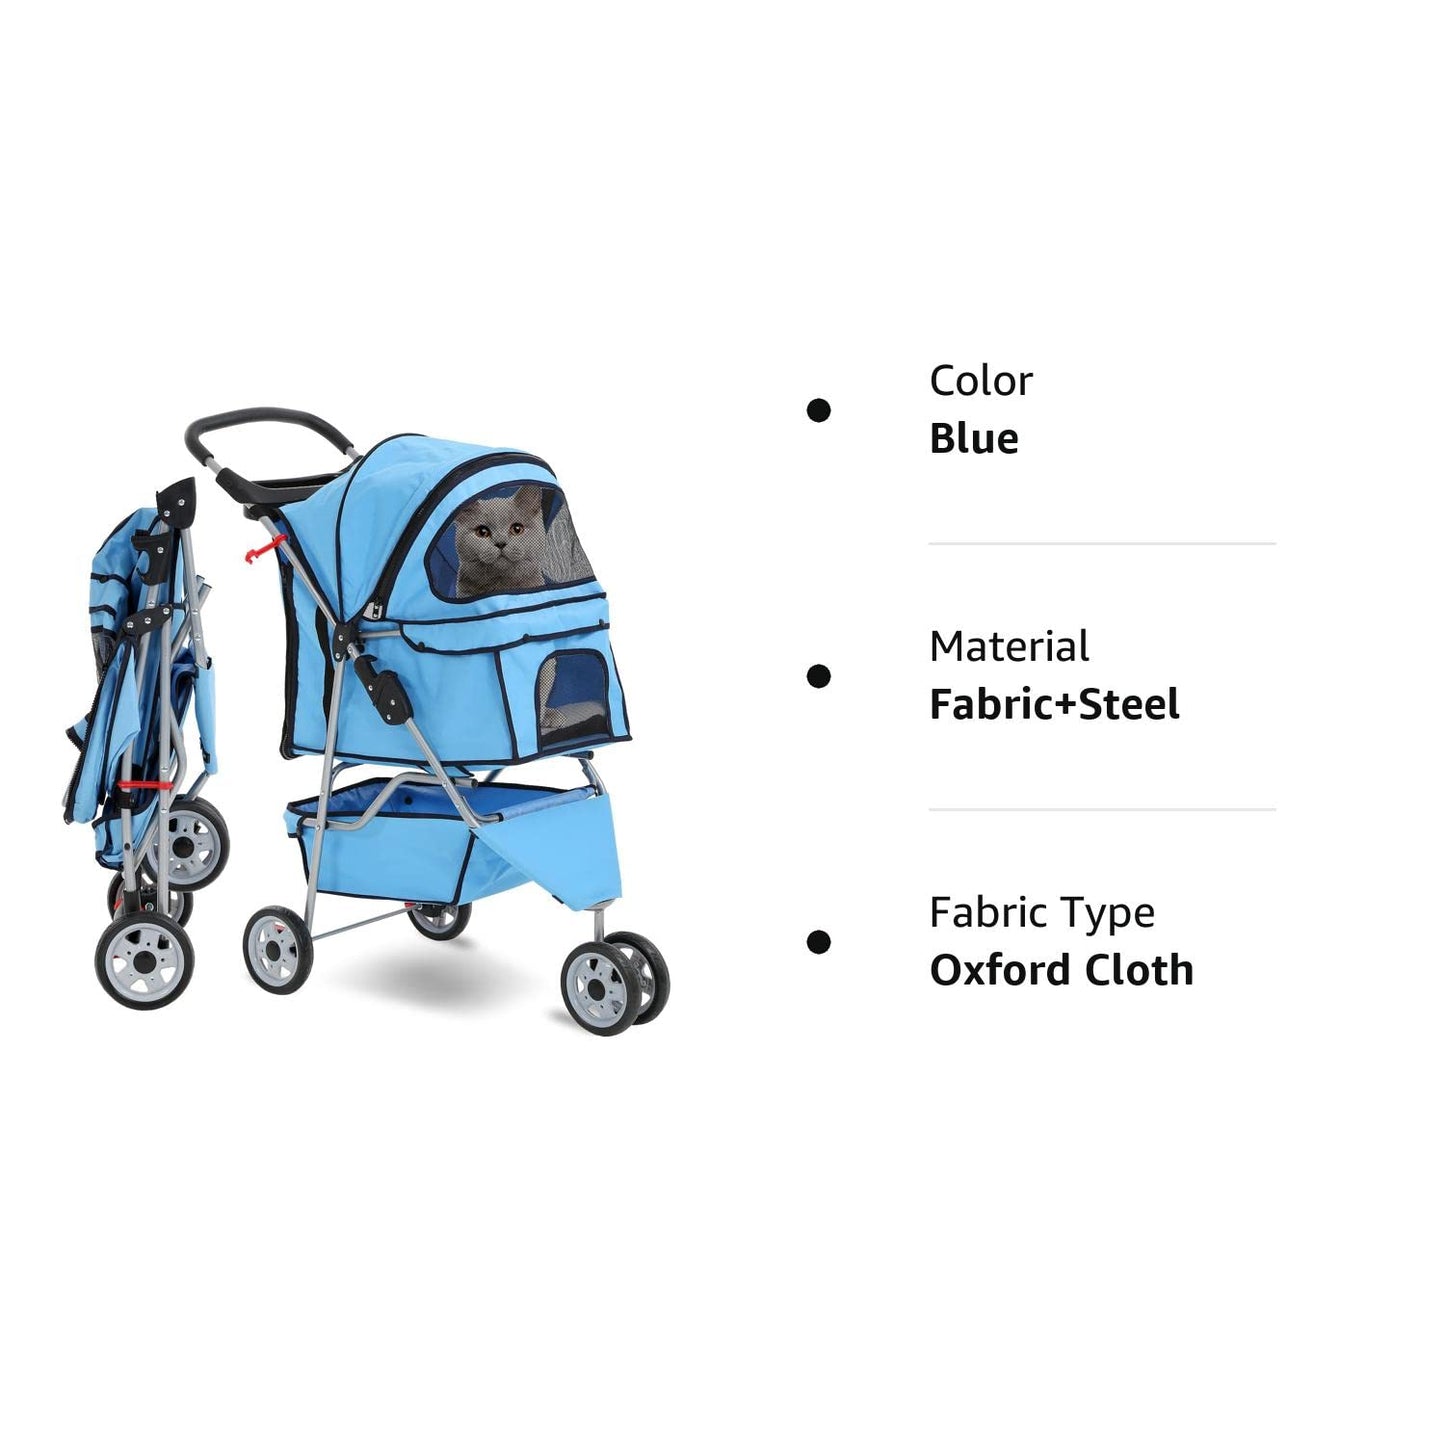 Folding Dog Stroller, 3 Wheels Pet Strollers Pet Gear for Small Medium Cats Dogs Puppy with Storage Basket, Cup Holder,Lightweight Blue 35.04Inchx17.32Inchx38.58Inch